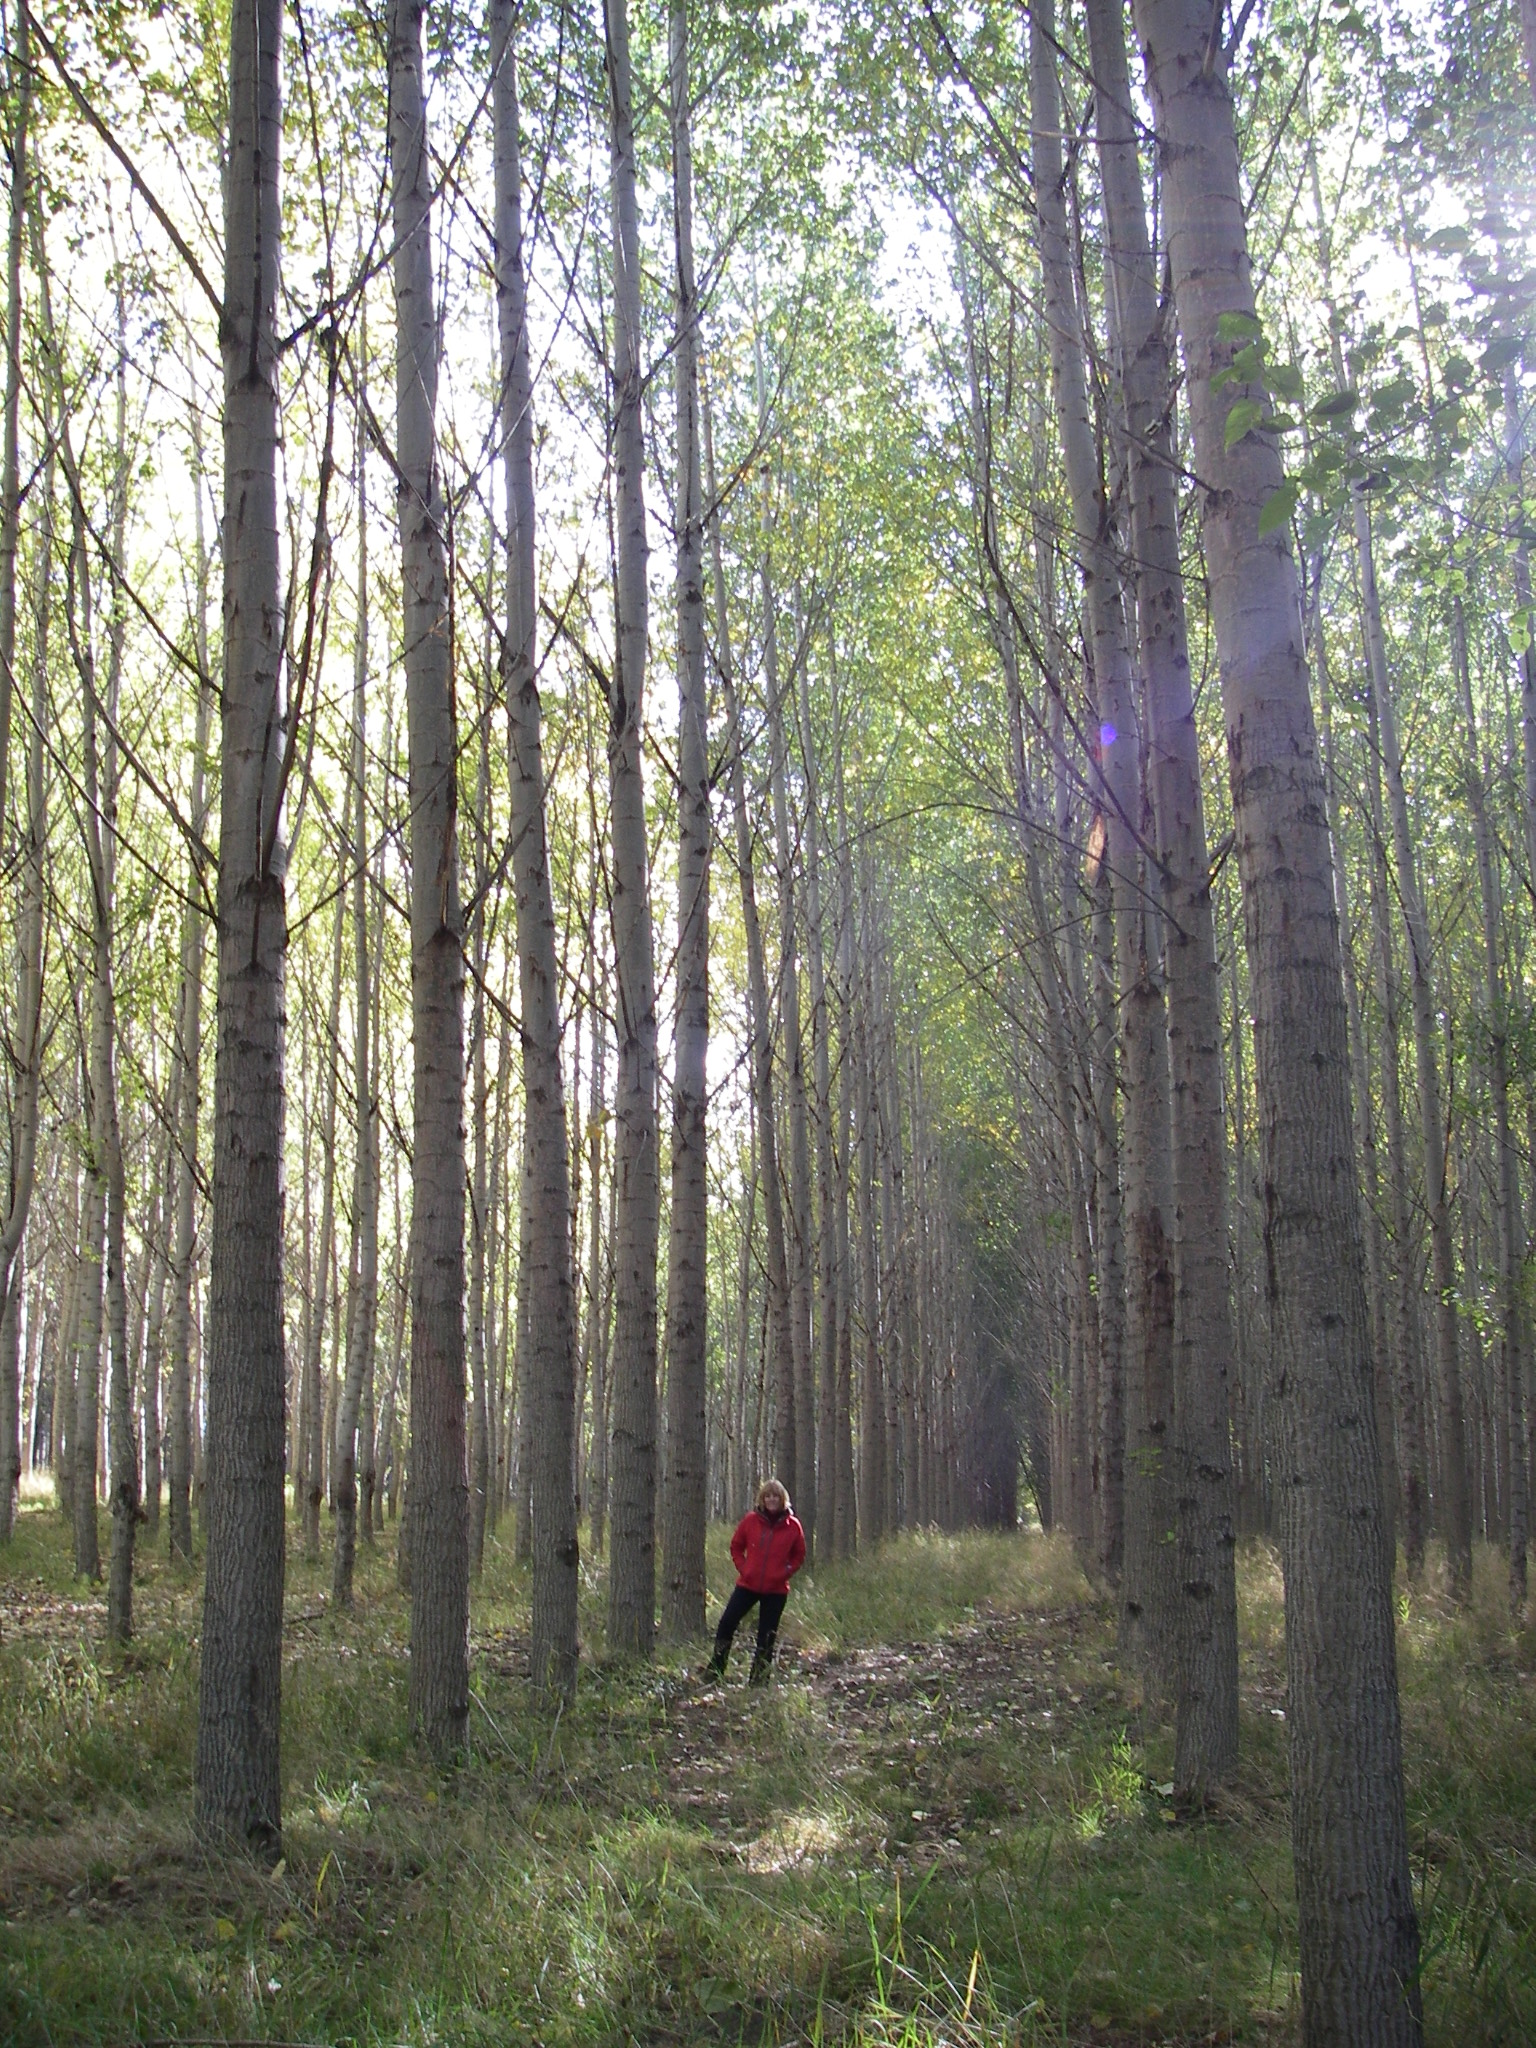 A researcher in a red coat stands between long straight rows of 15-metre tall poplar trees.